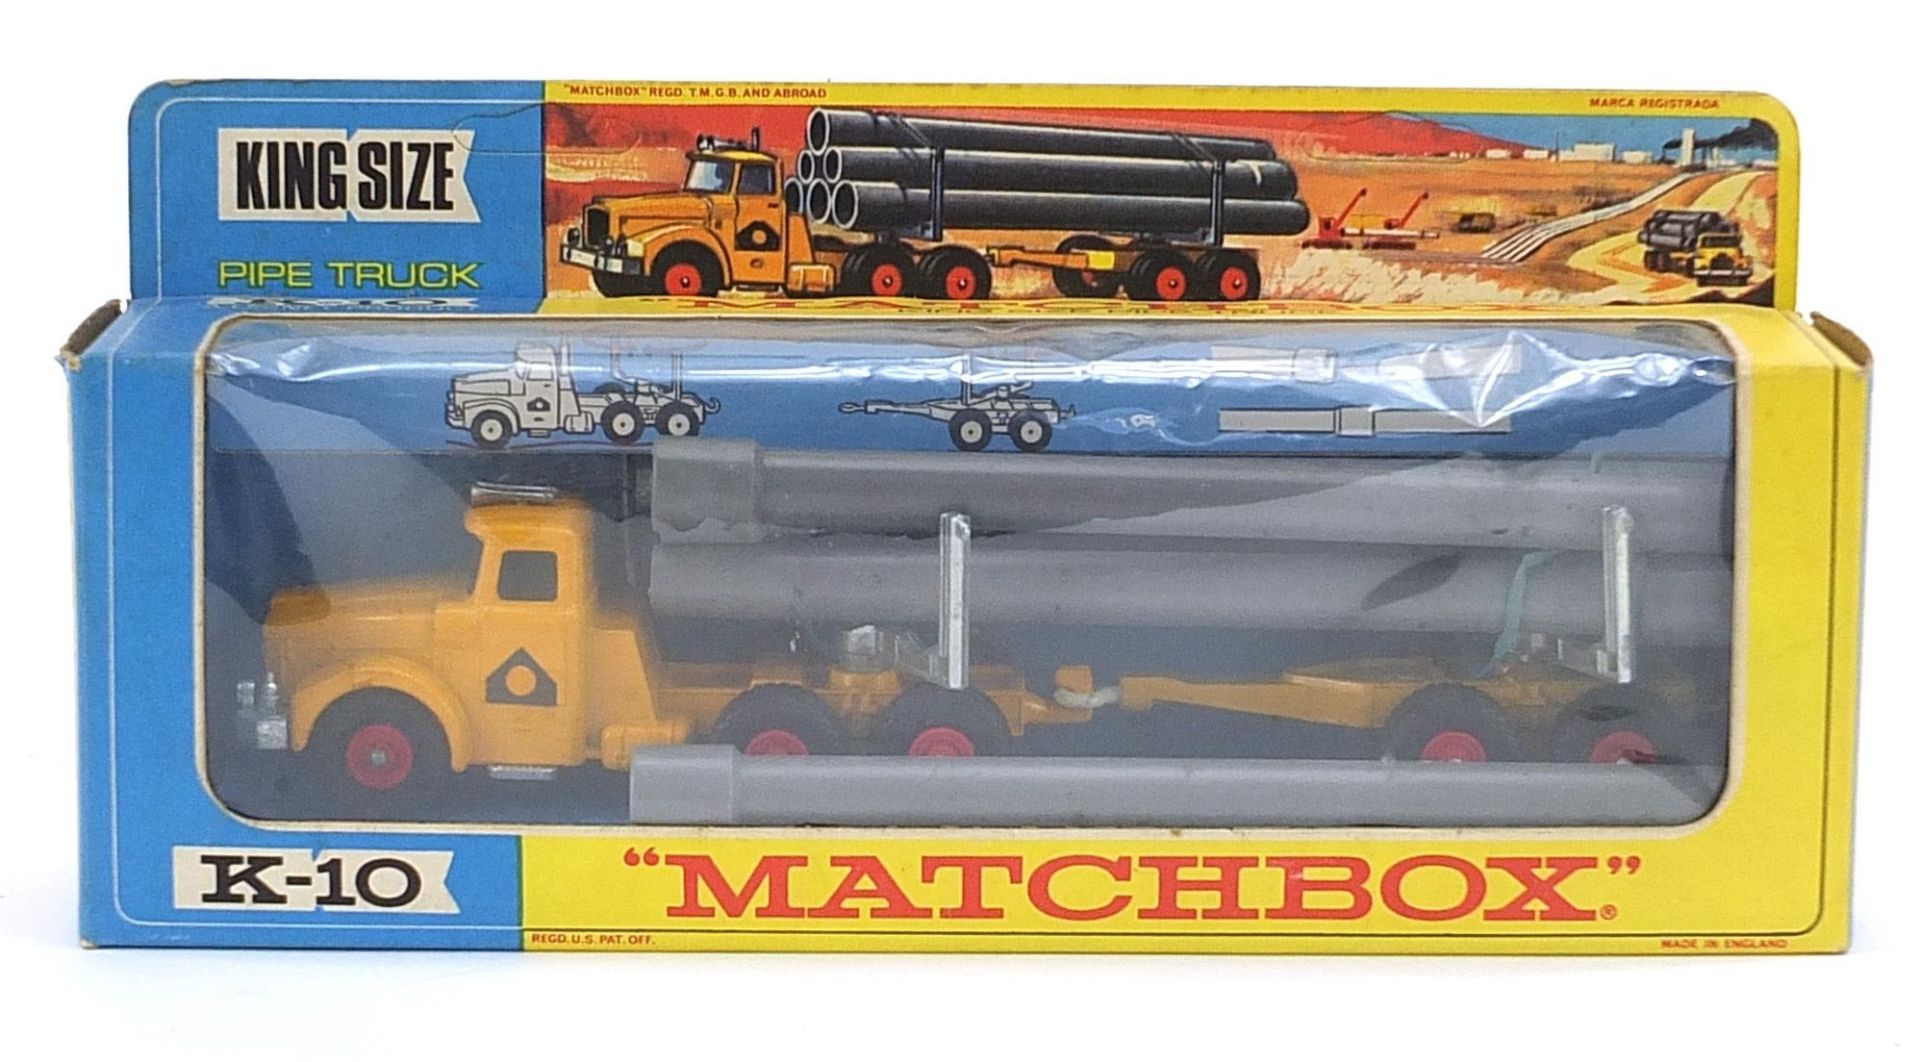 Matchbox diecast king size pipe truck with box, K-10